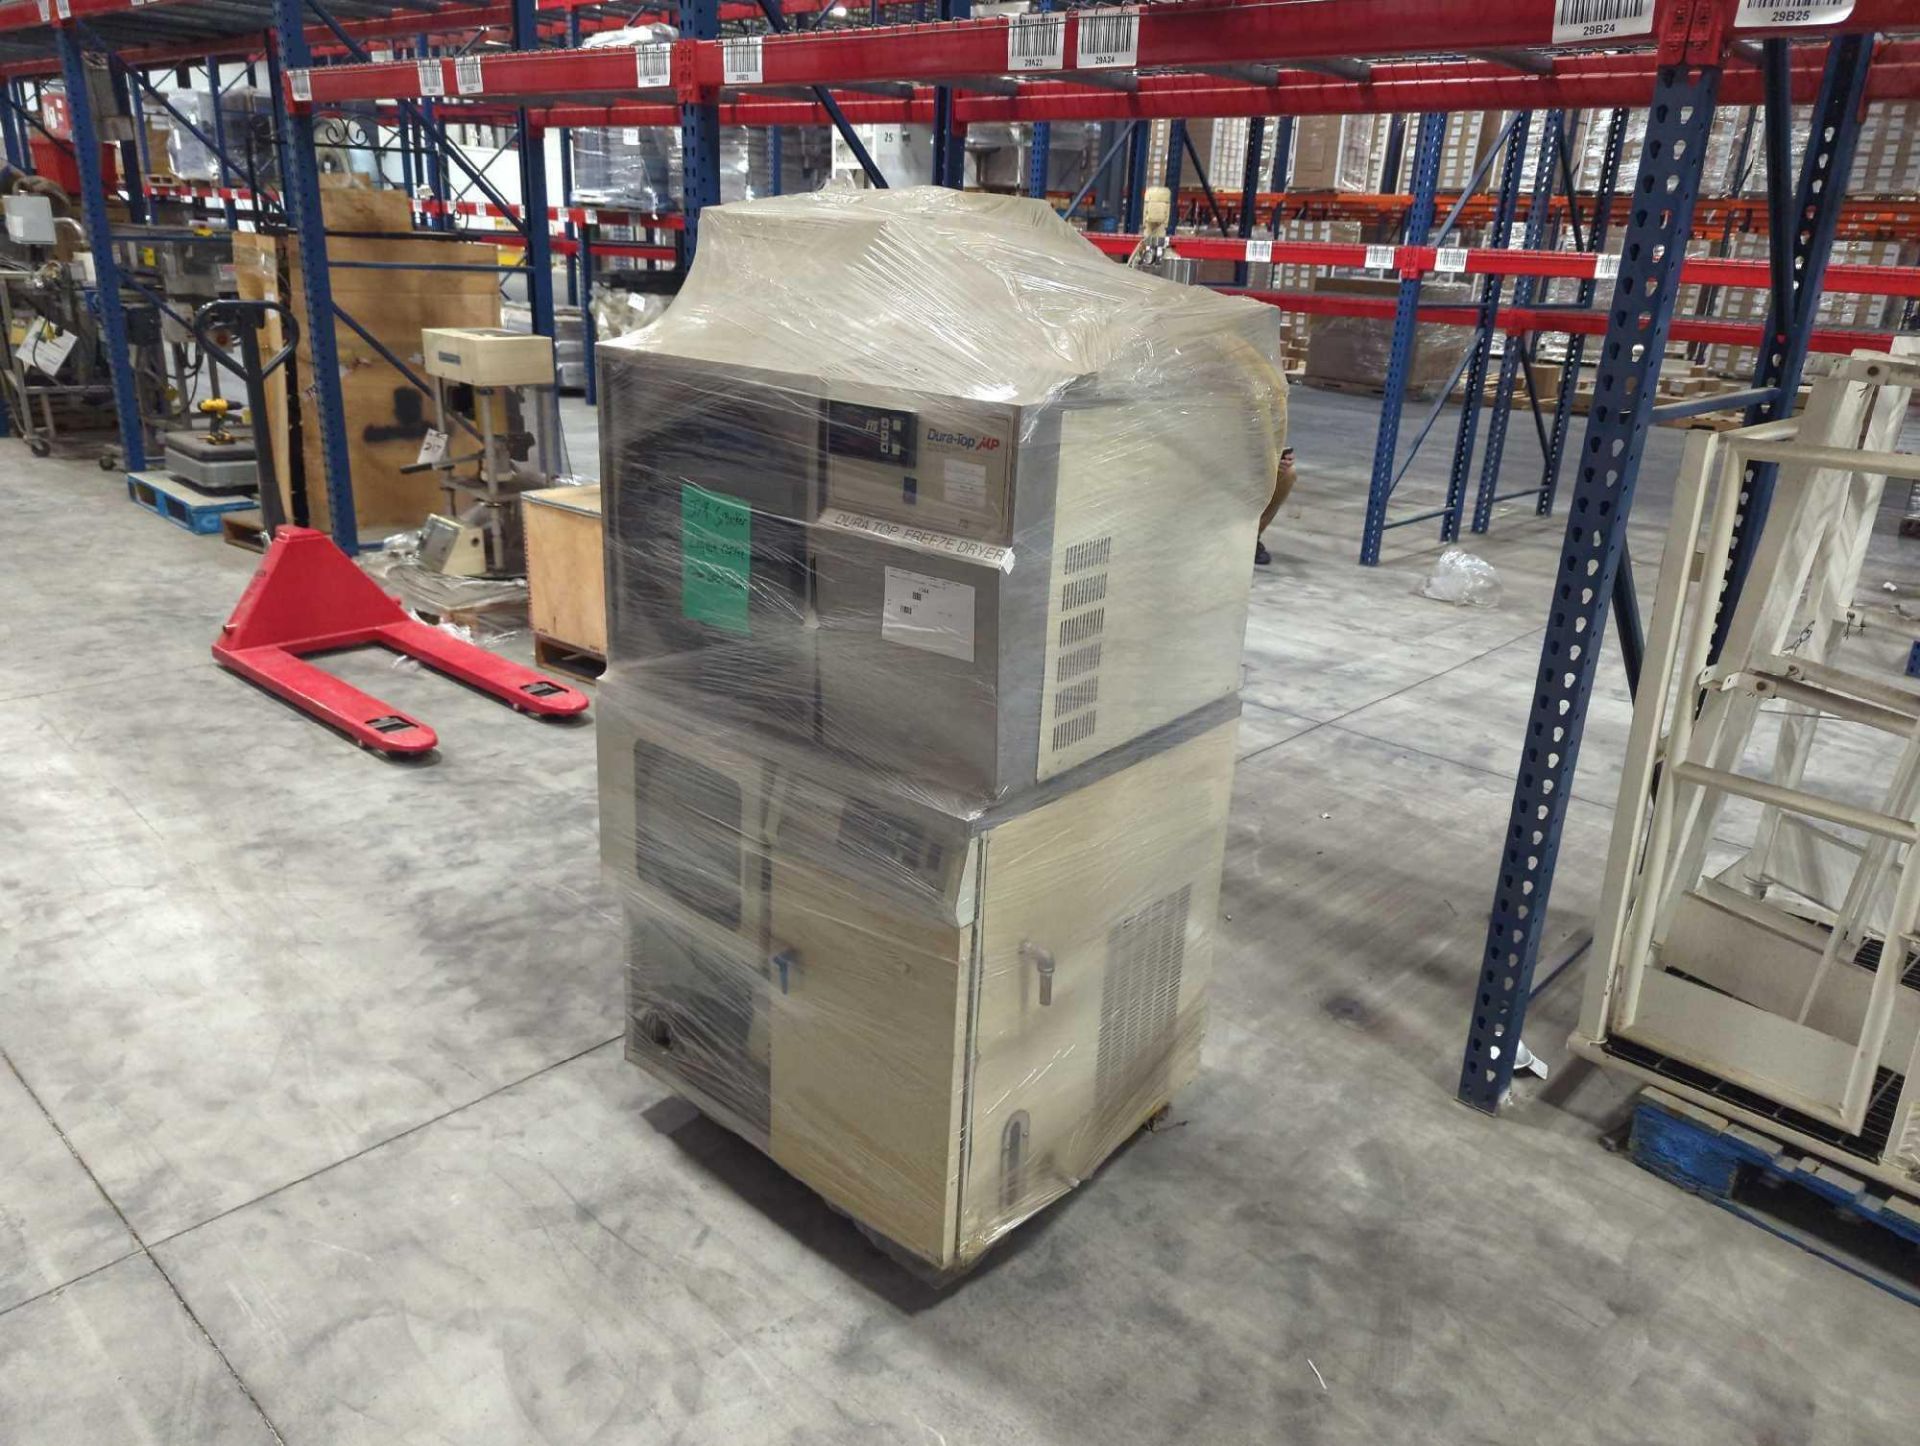 Duratop MP bulk tray dryer and corrosion resistant freeze dryer - Image 2 of 19